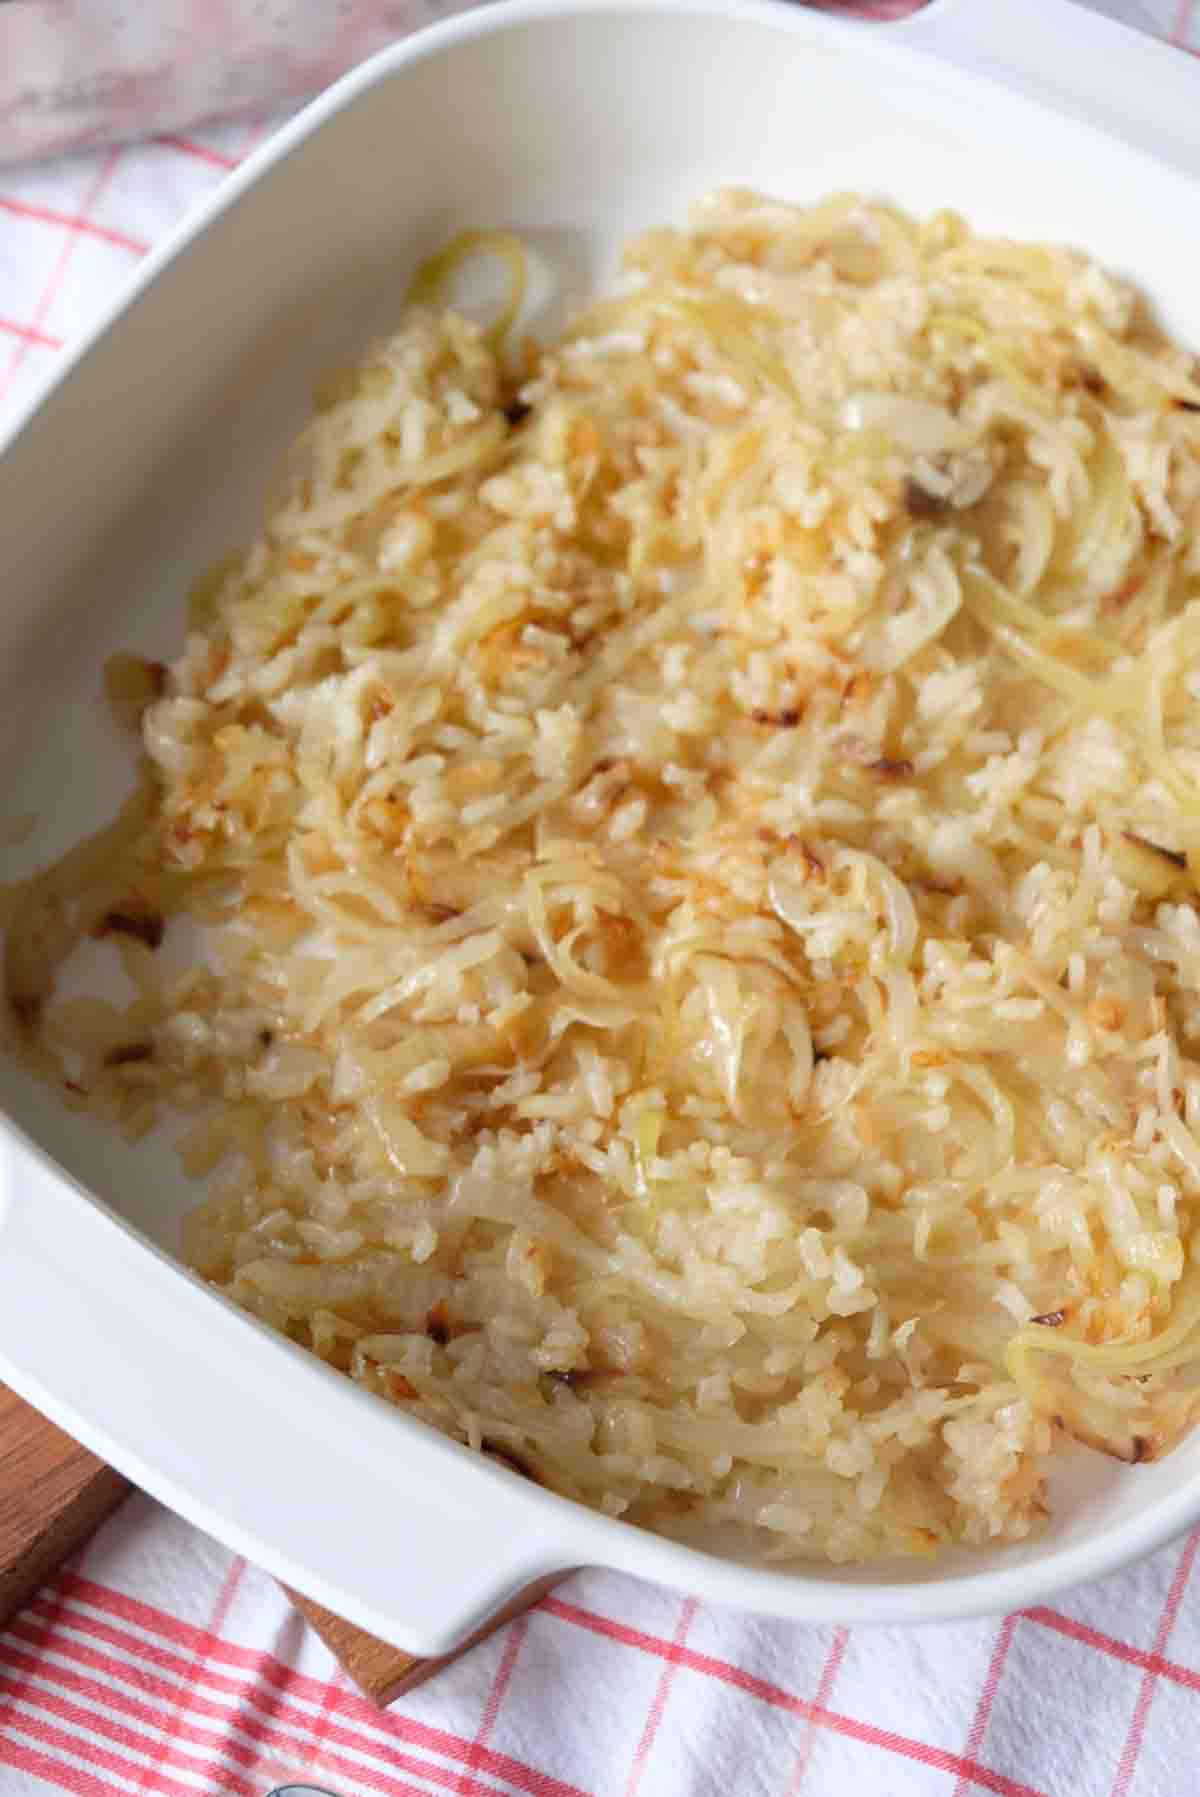 Onion and parcooked rice slow roasted in butter.